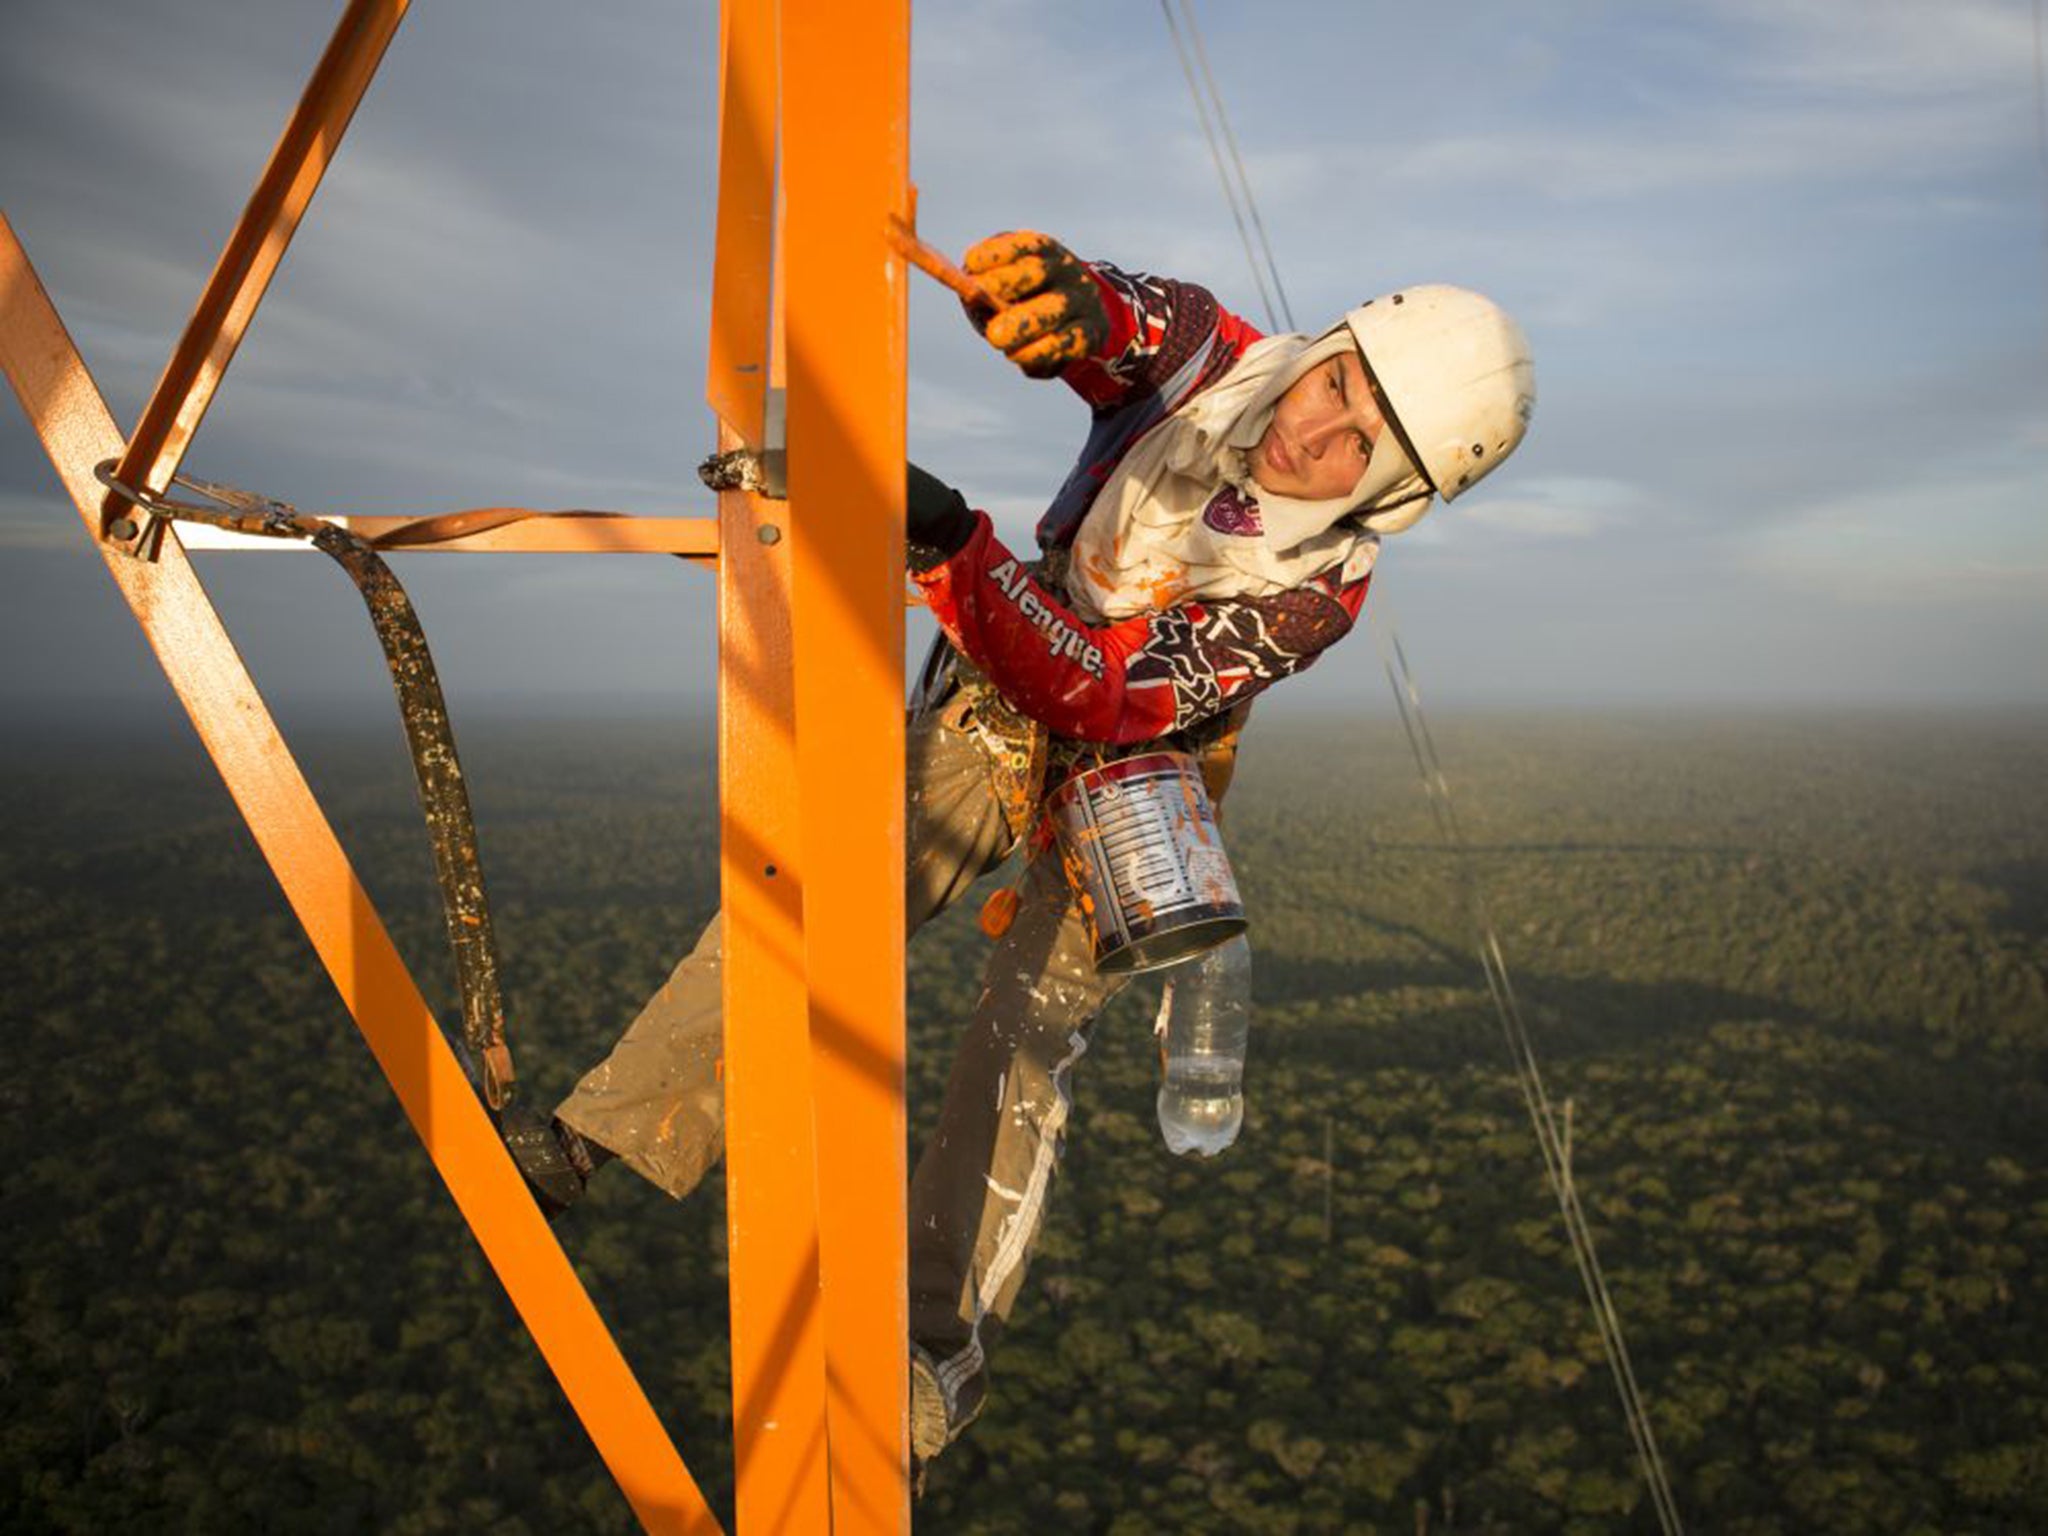 Two maintenance technicians will stay at the remote site north of Manaus 